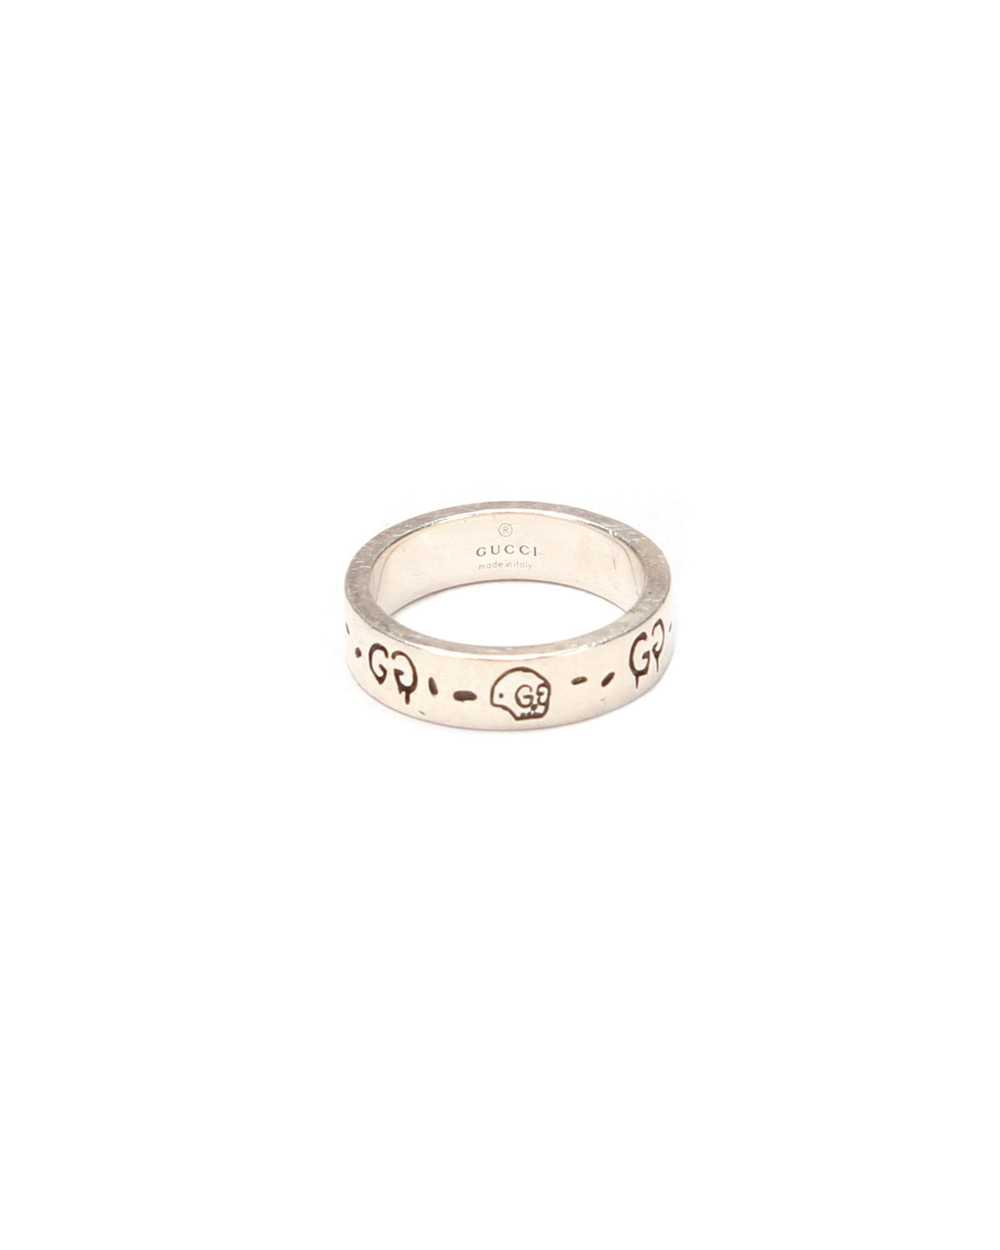 Gucci Silver Ghost Icon Ring - image 1